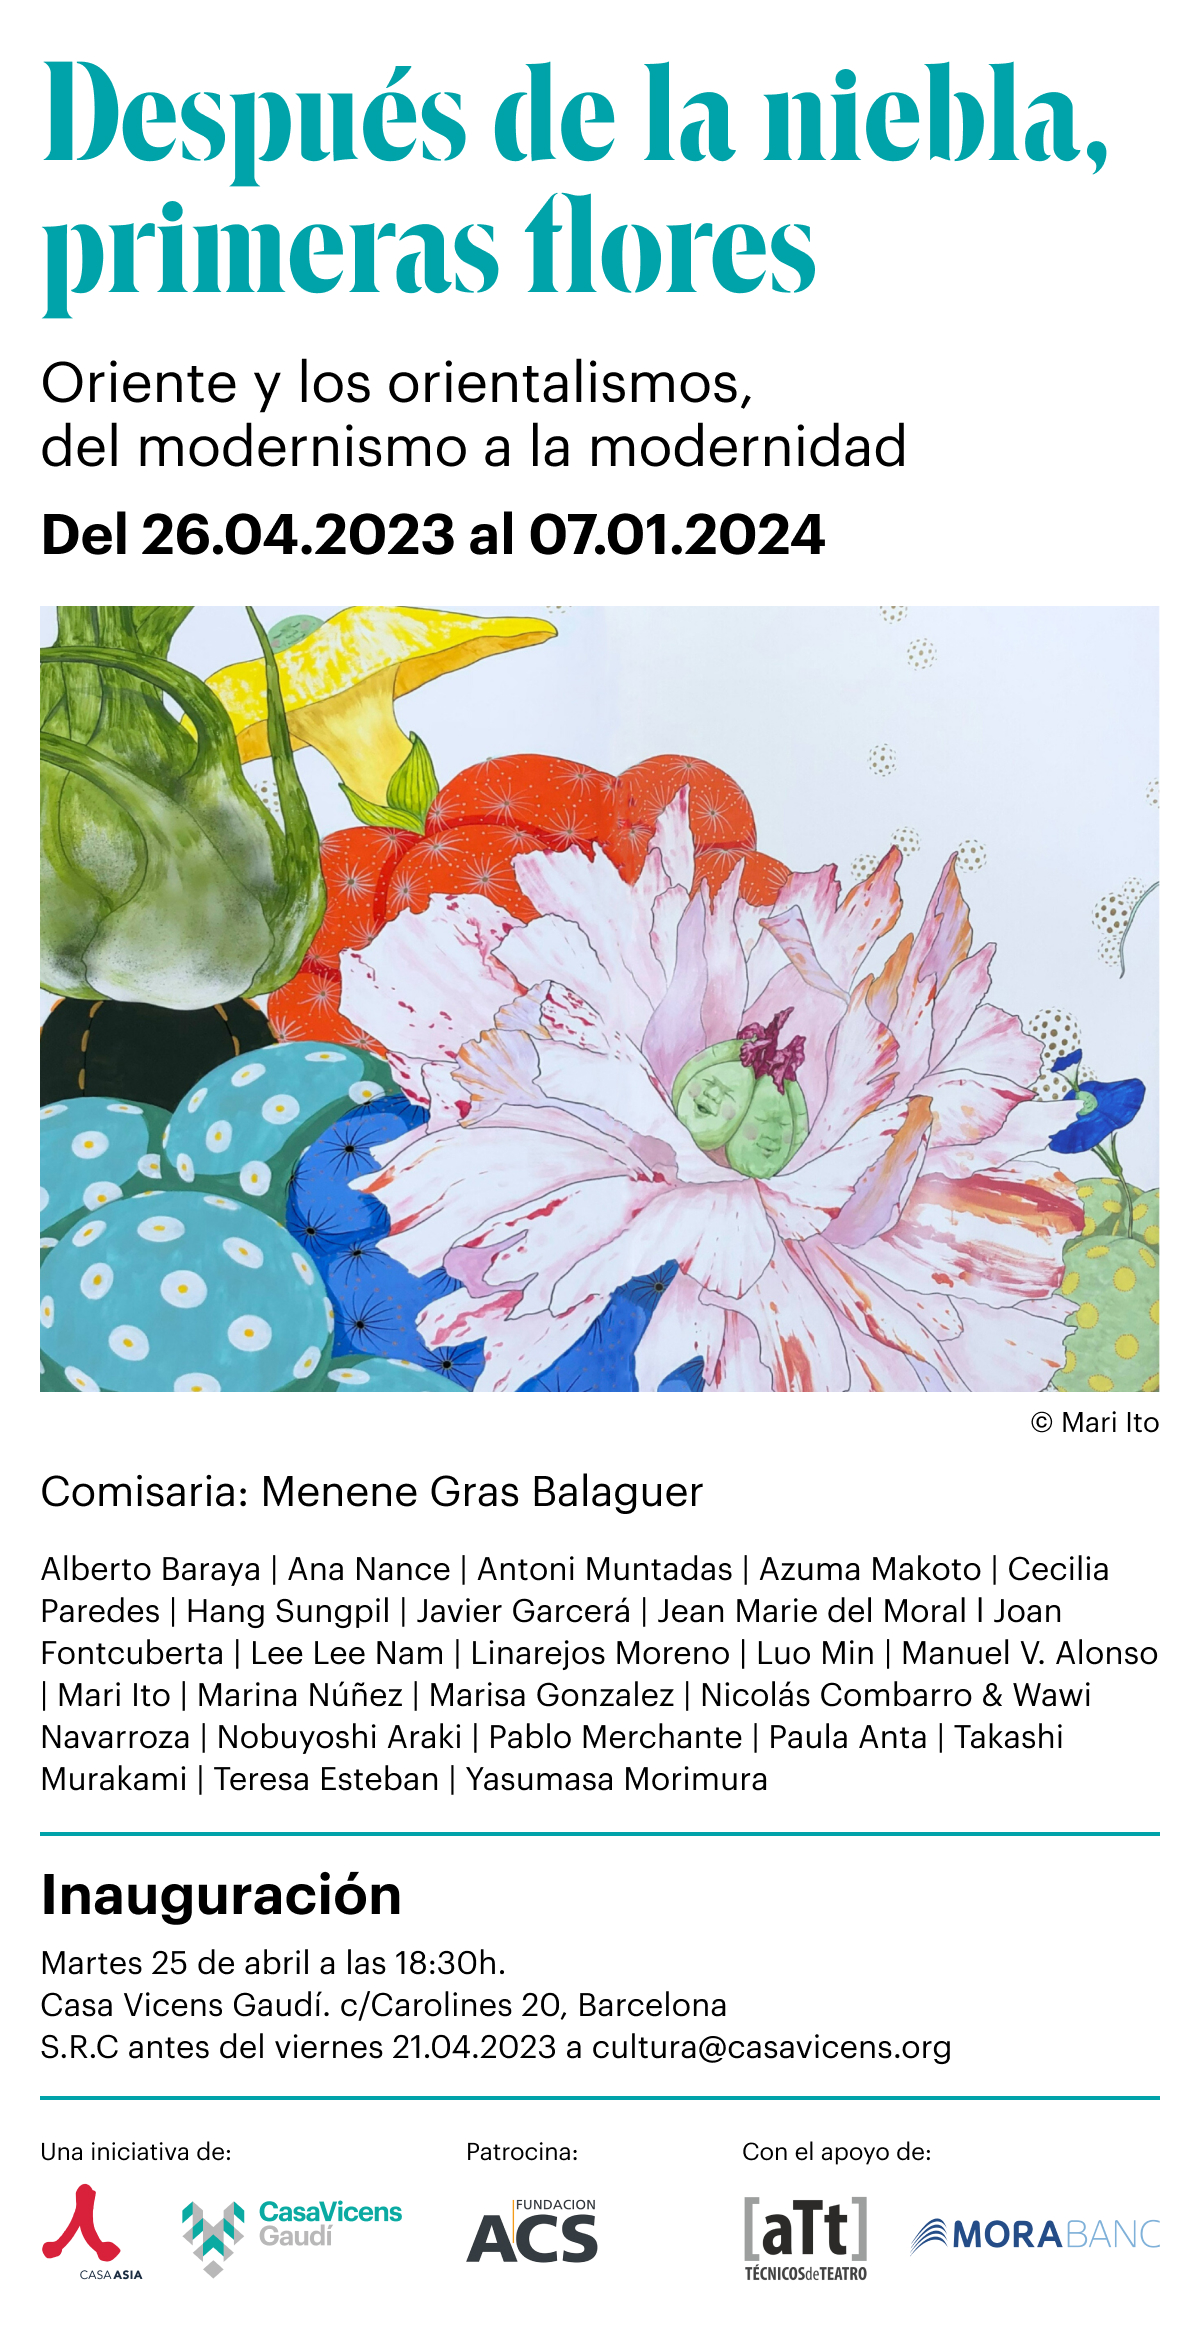 Marisa González | Forthcoming group exhibition at Casa Vicens curated by Menene Gras Balaguer